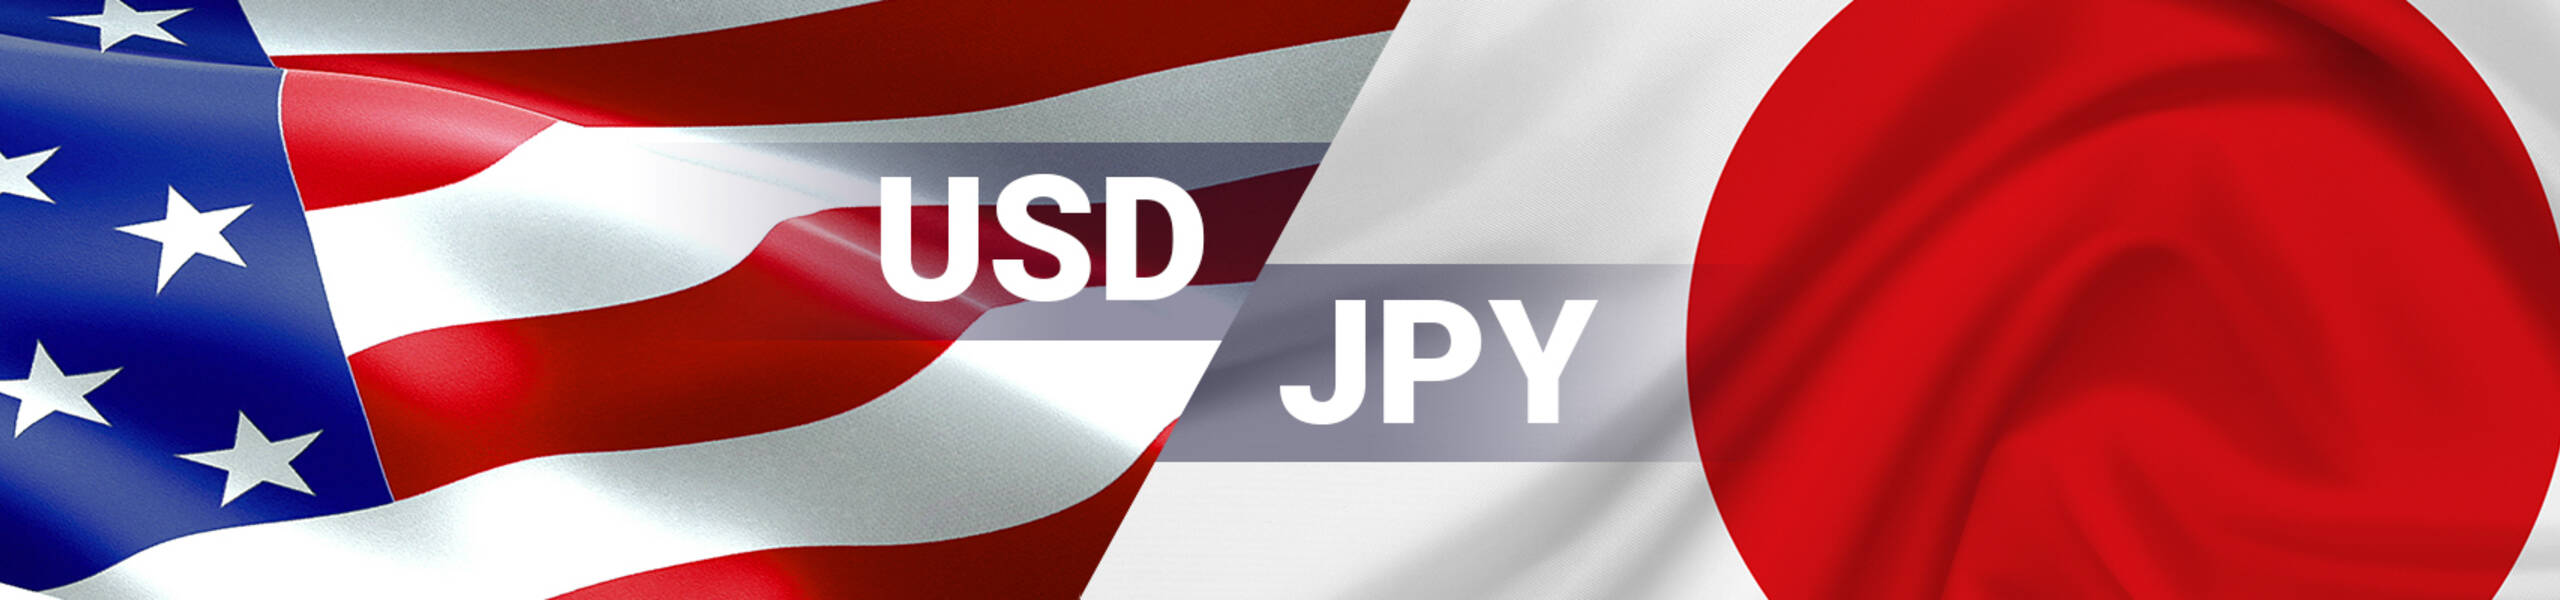 USD/JPY Dailyレポート 2017/08/08